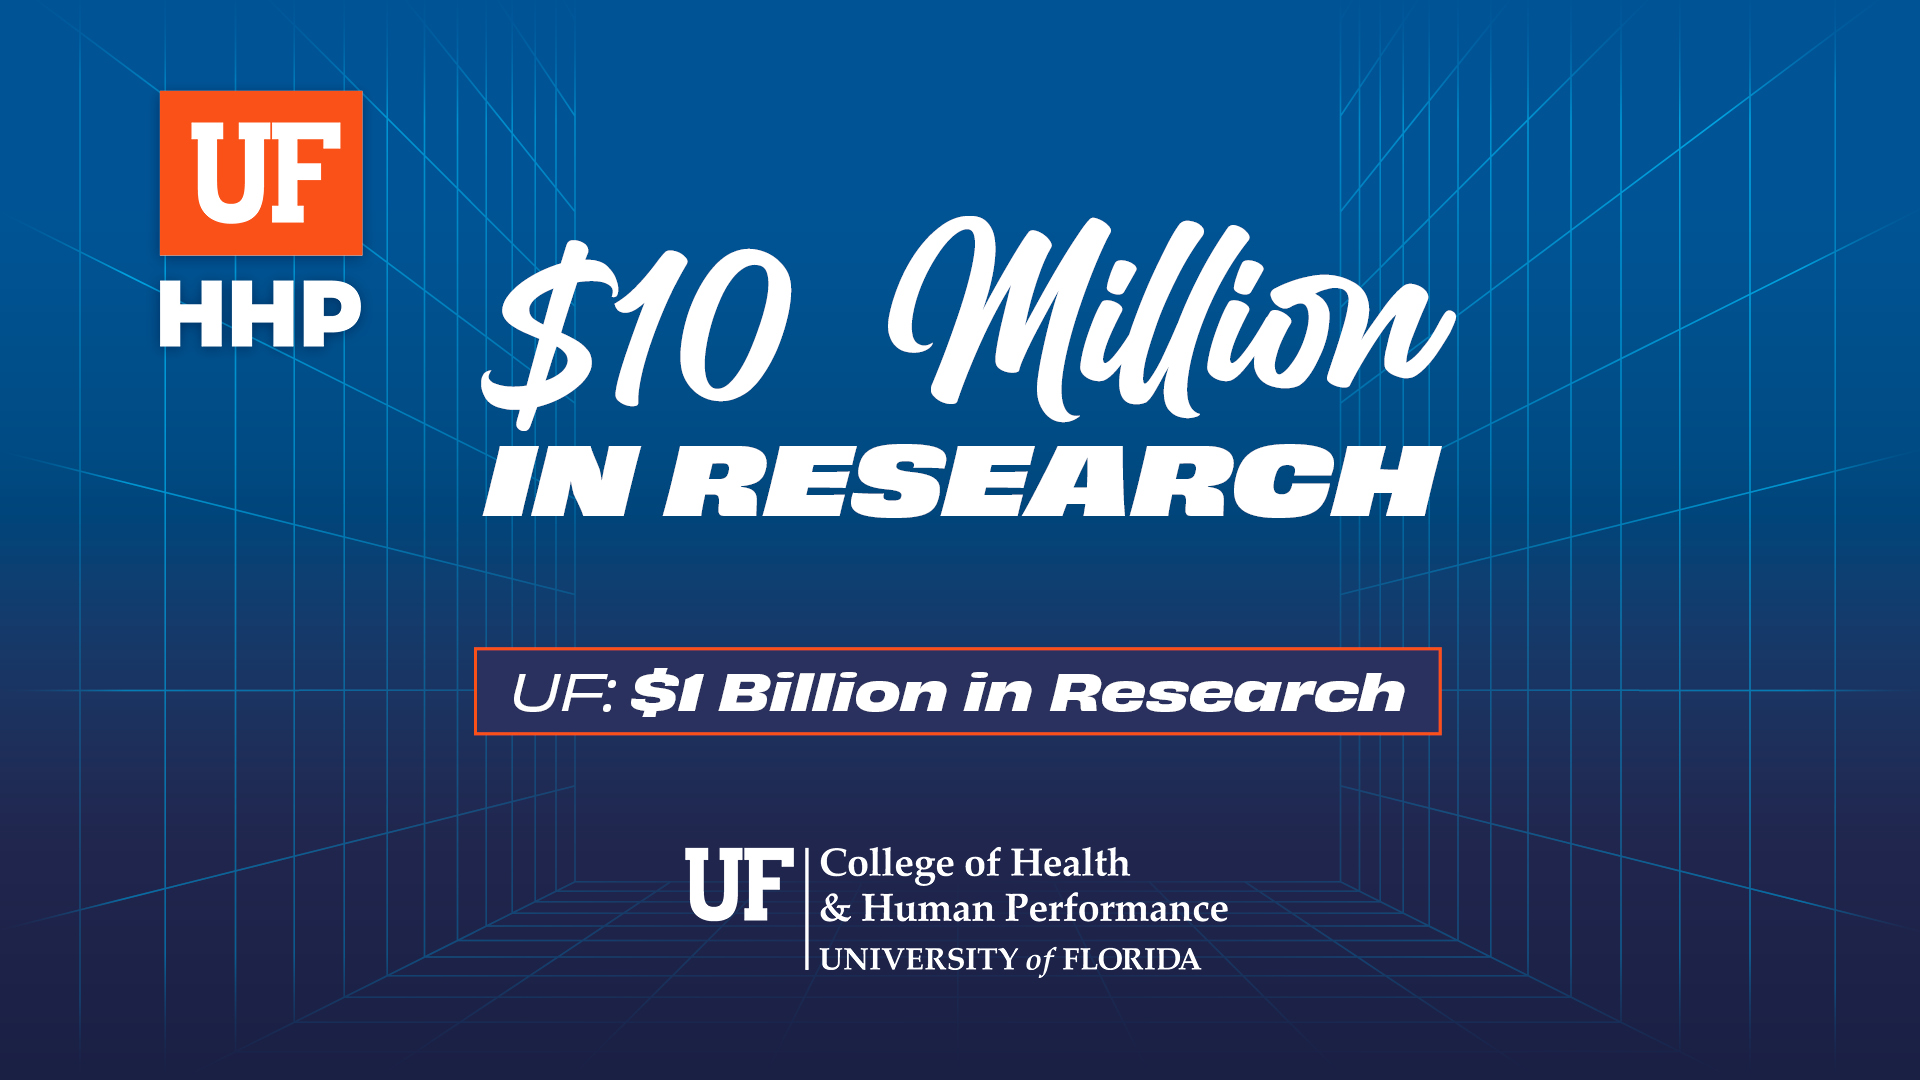 HHP contributes to the university’s $1 billion in research expenditures